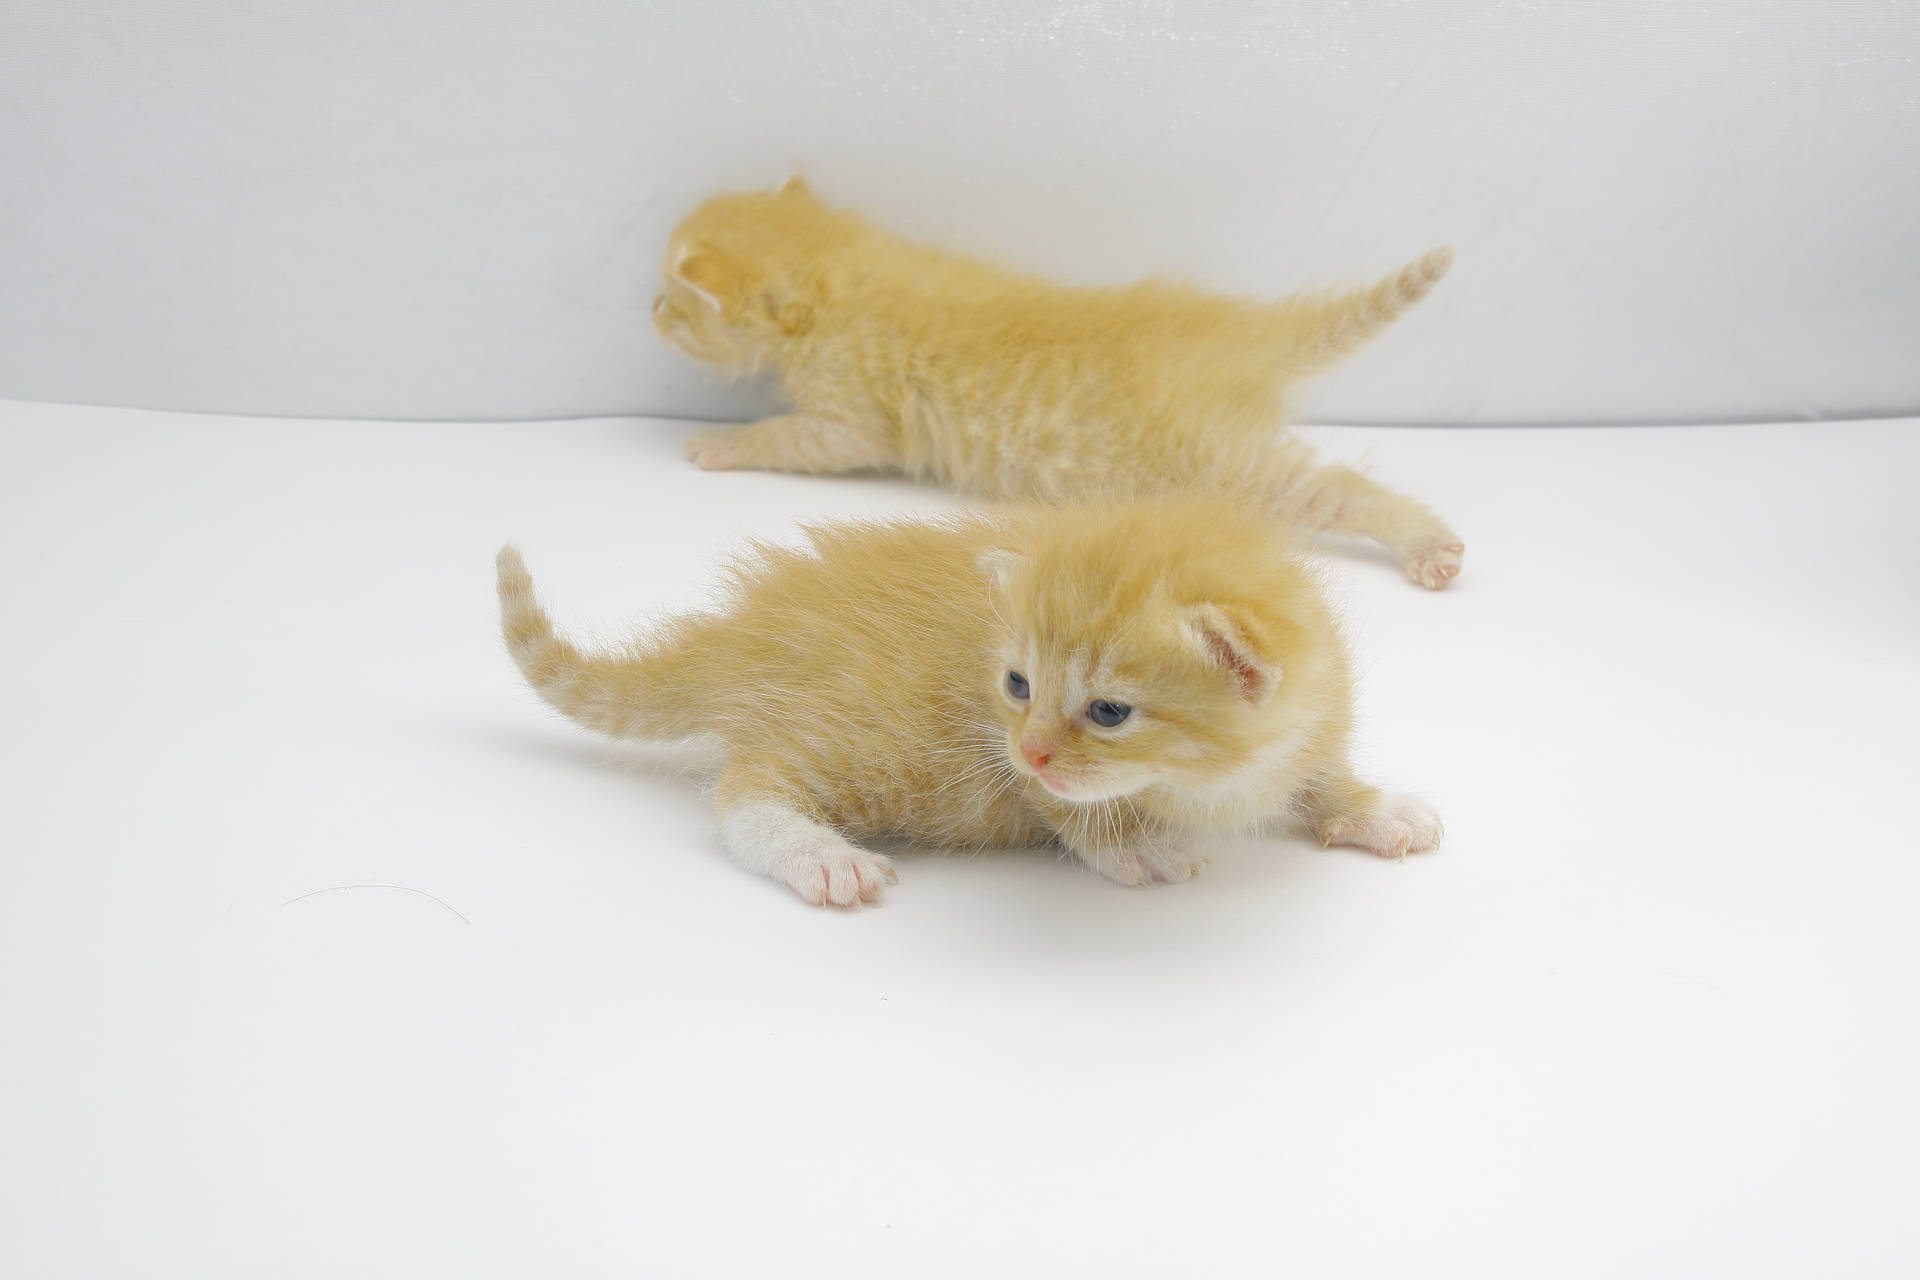 Adorable Tiny Fluffy Kittens